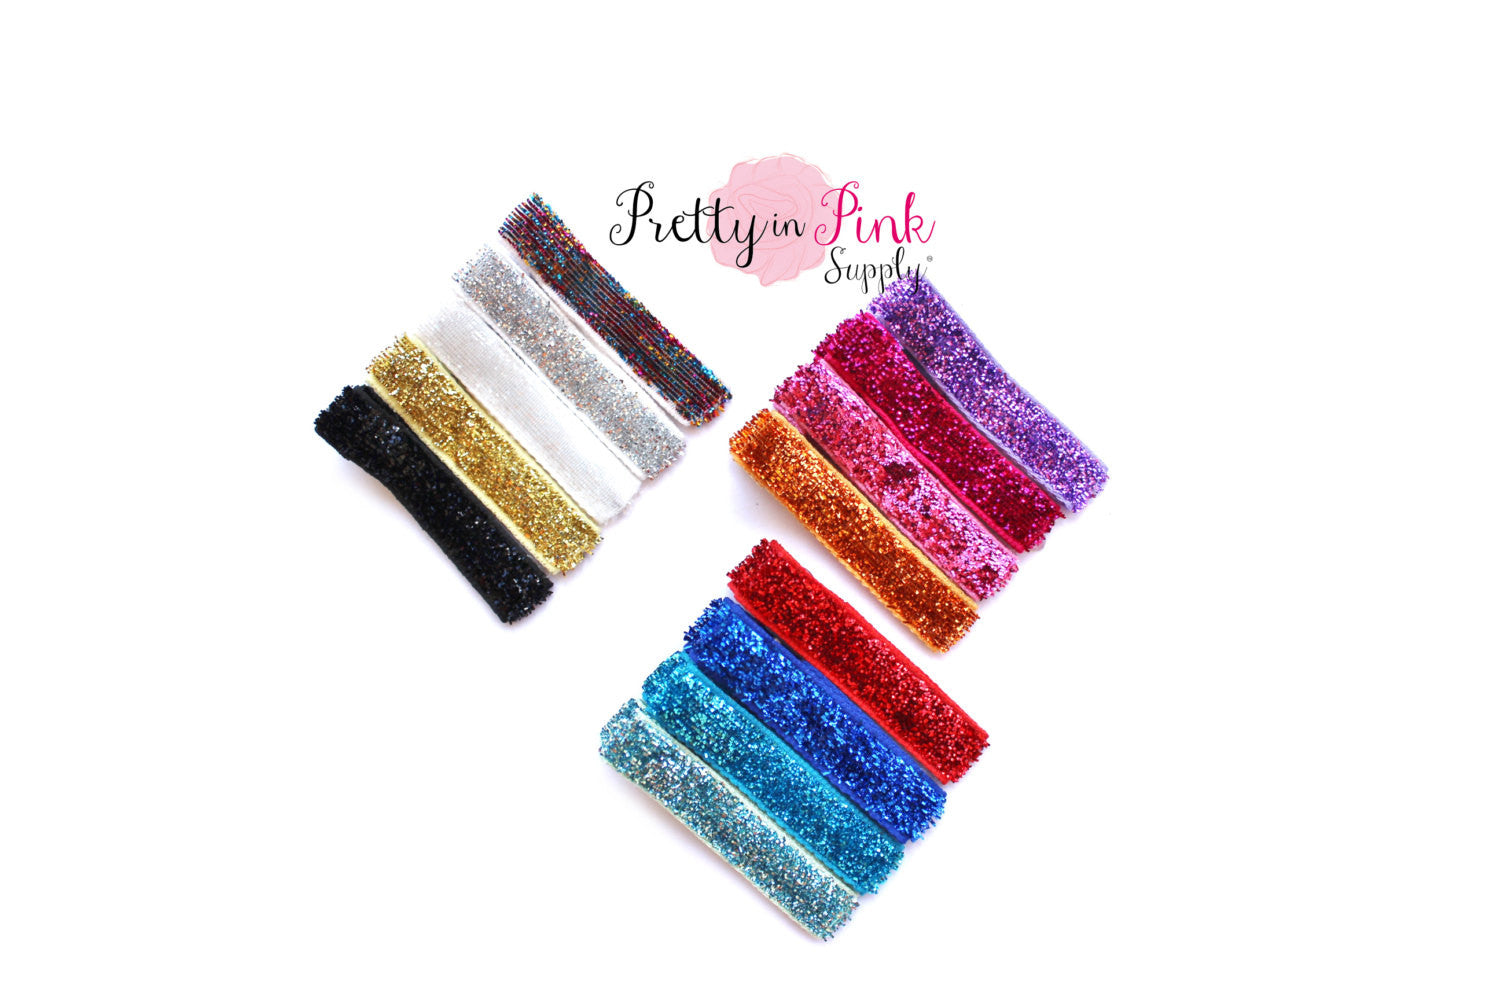 Glitter Ribbon Lined Hair Clips - Pretty in Pink Supply